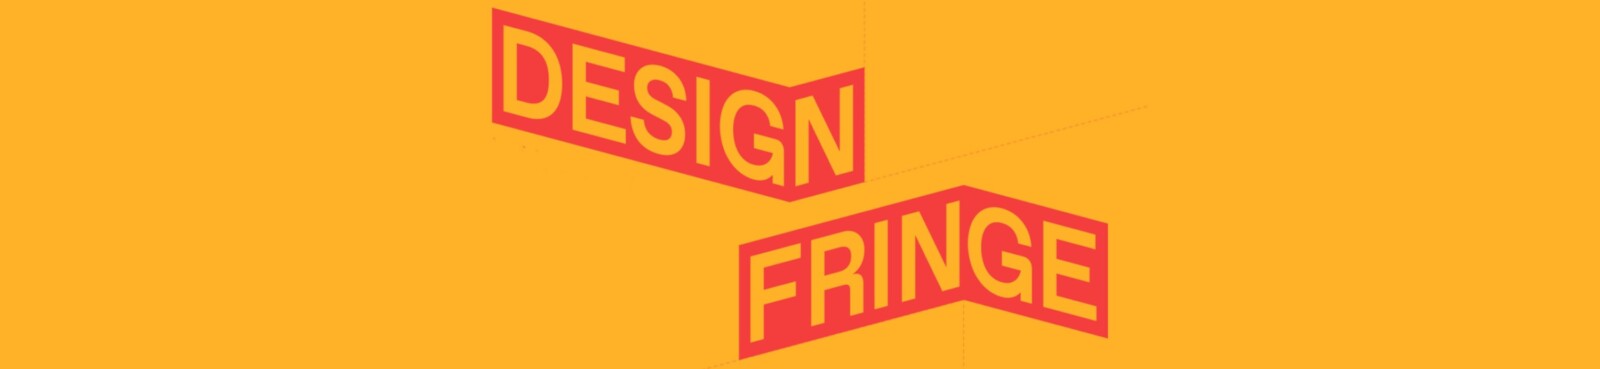 [alt image] the words Design Fringe on a red lettering, with a yellow background behind it